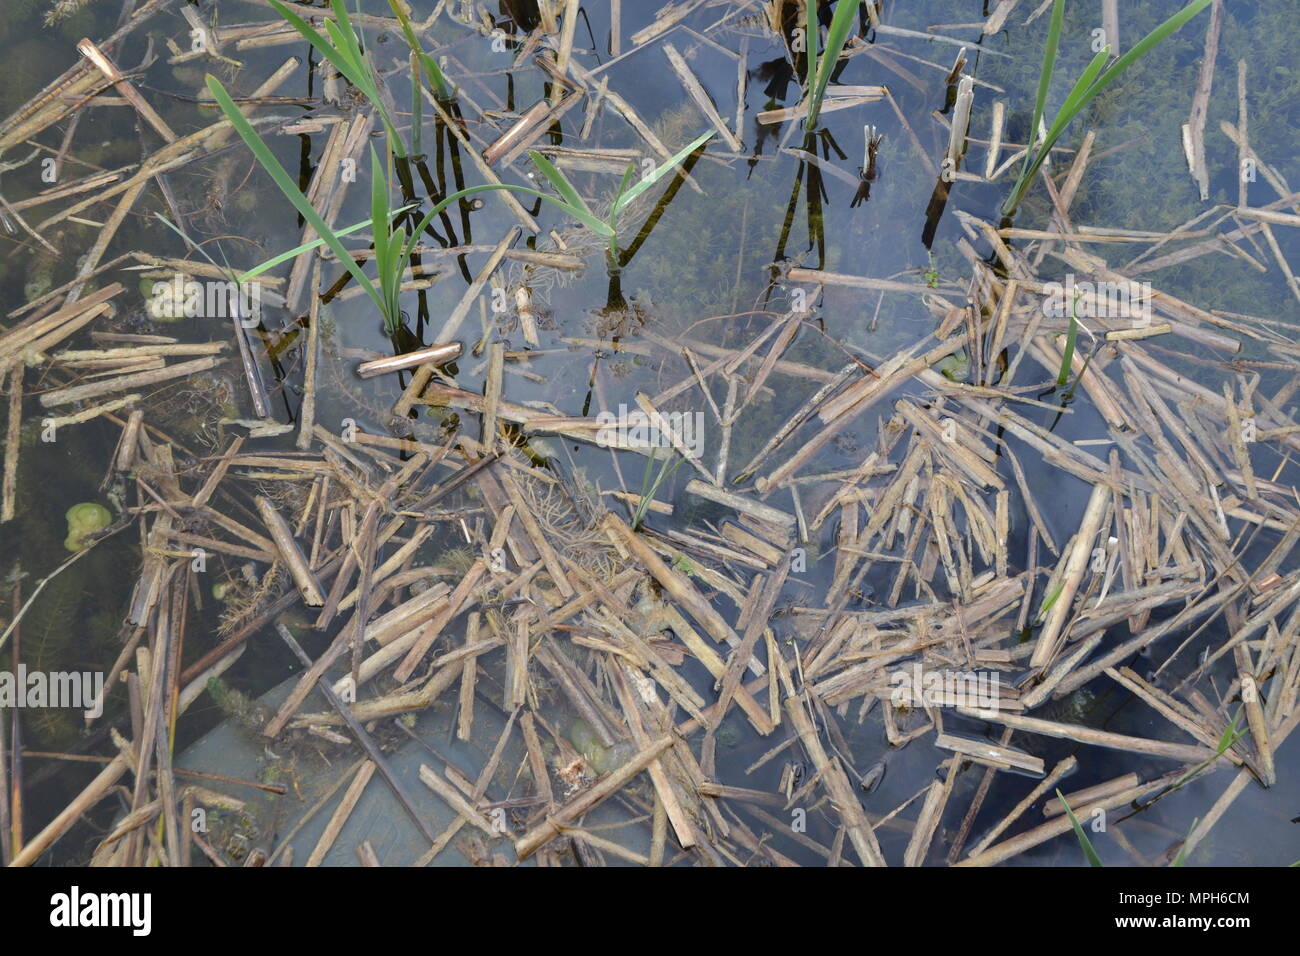 Floating reed debris in a lake with visible pondweed Stock Photo